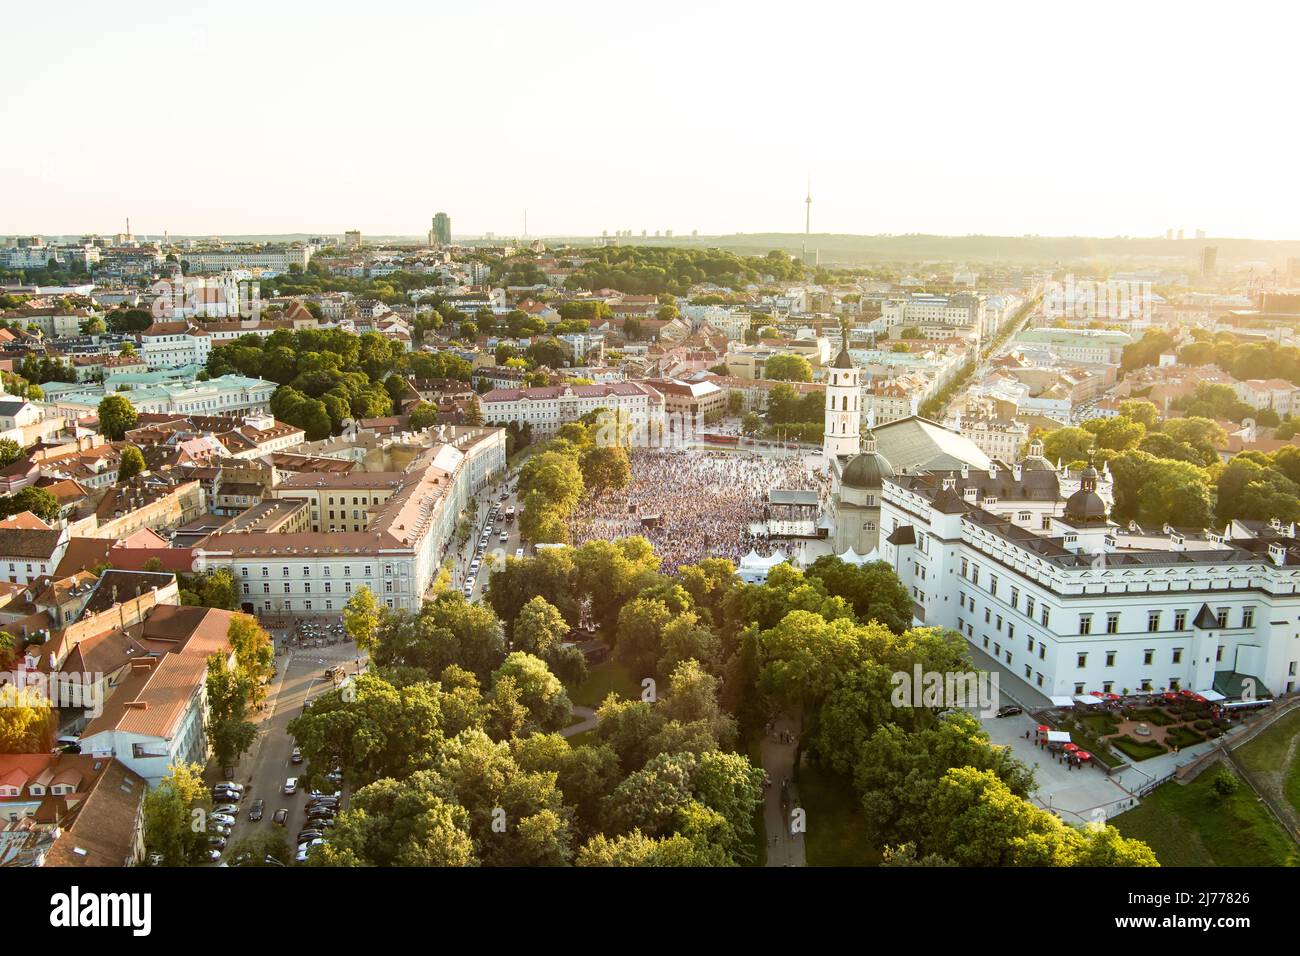 VILNIUS, LITHUANIA - JULY 6, 2021: Aerial view of crowds celebrating Lithuanian Statehood Day. Lots of people singing national anthem of Lithuania on Stock Photo